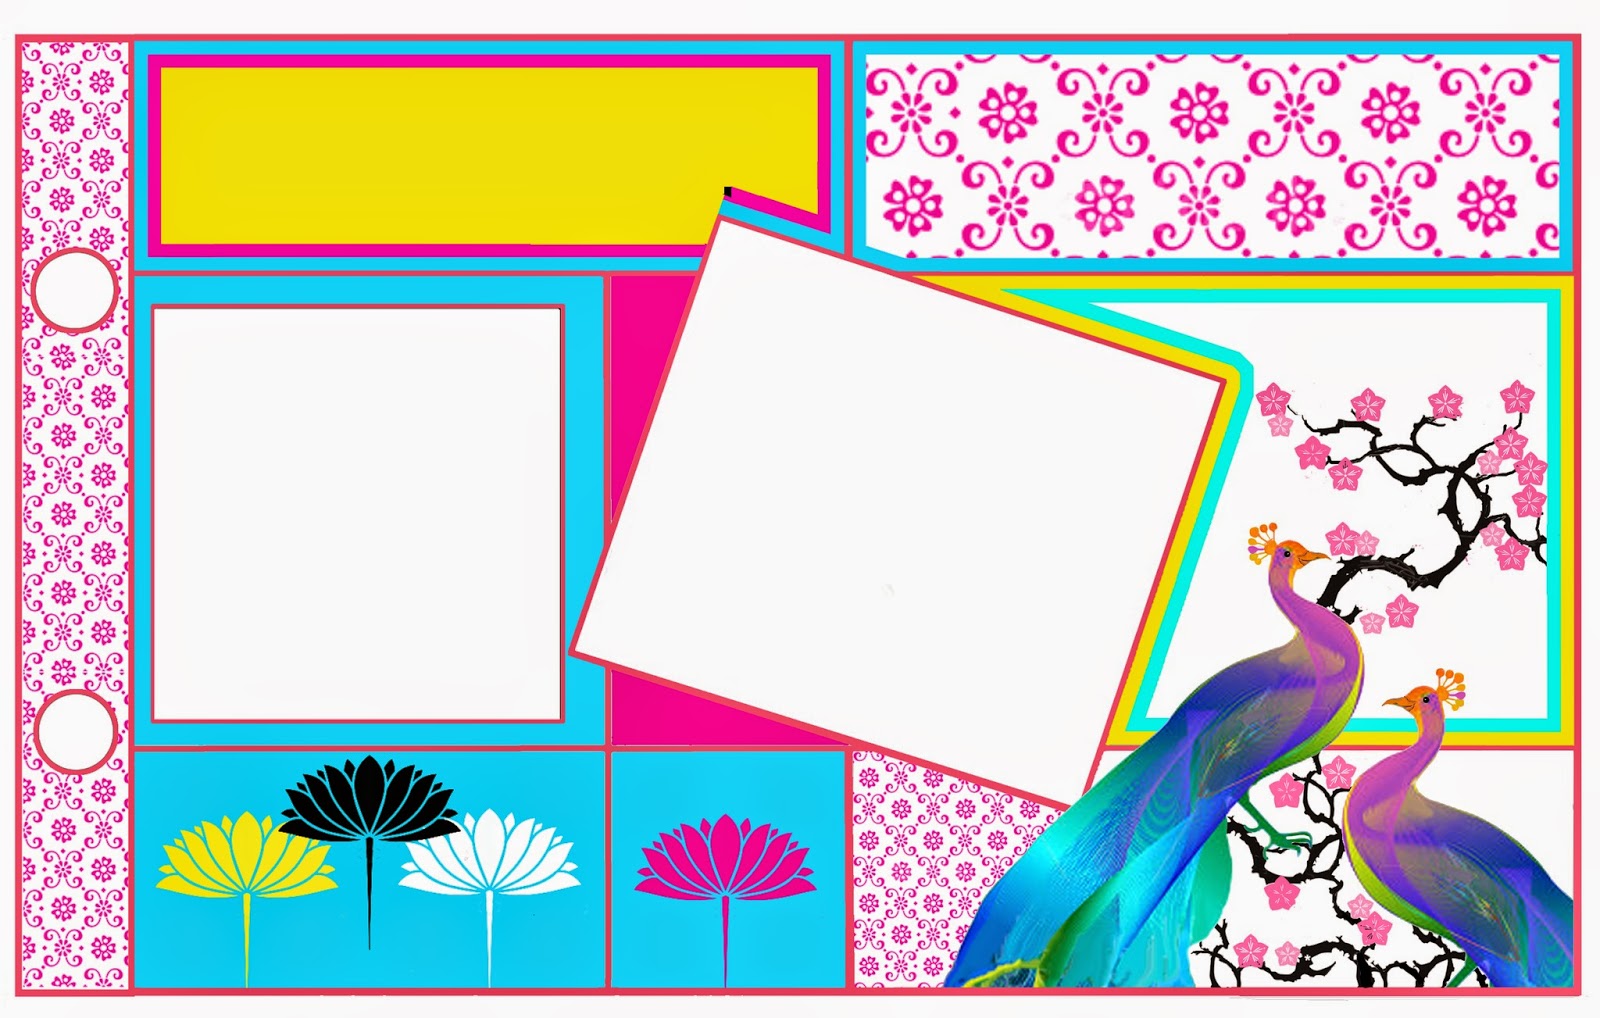 Bollywood: Free Printable Photo Album. - Oh My Fiesta! in english